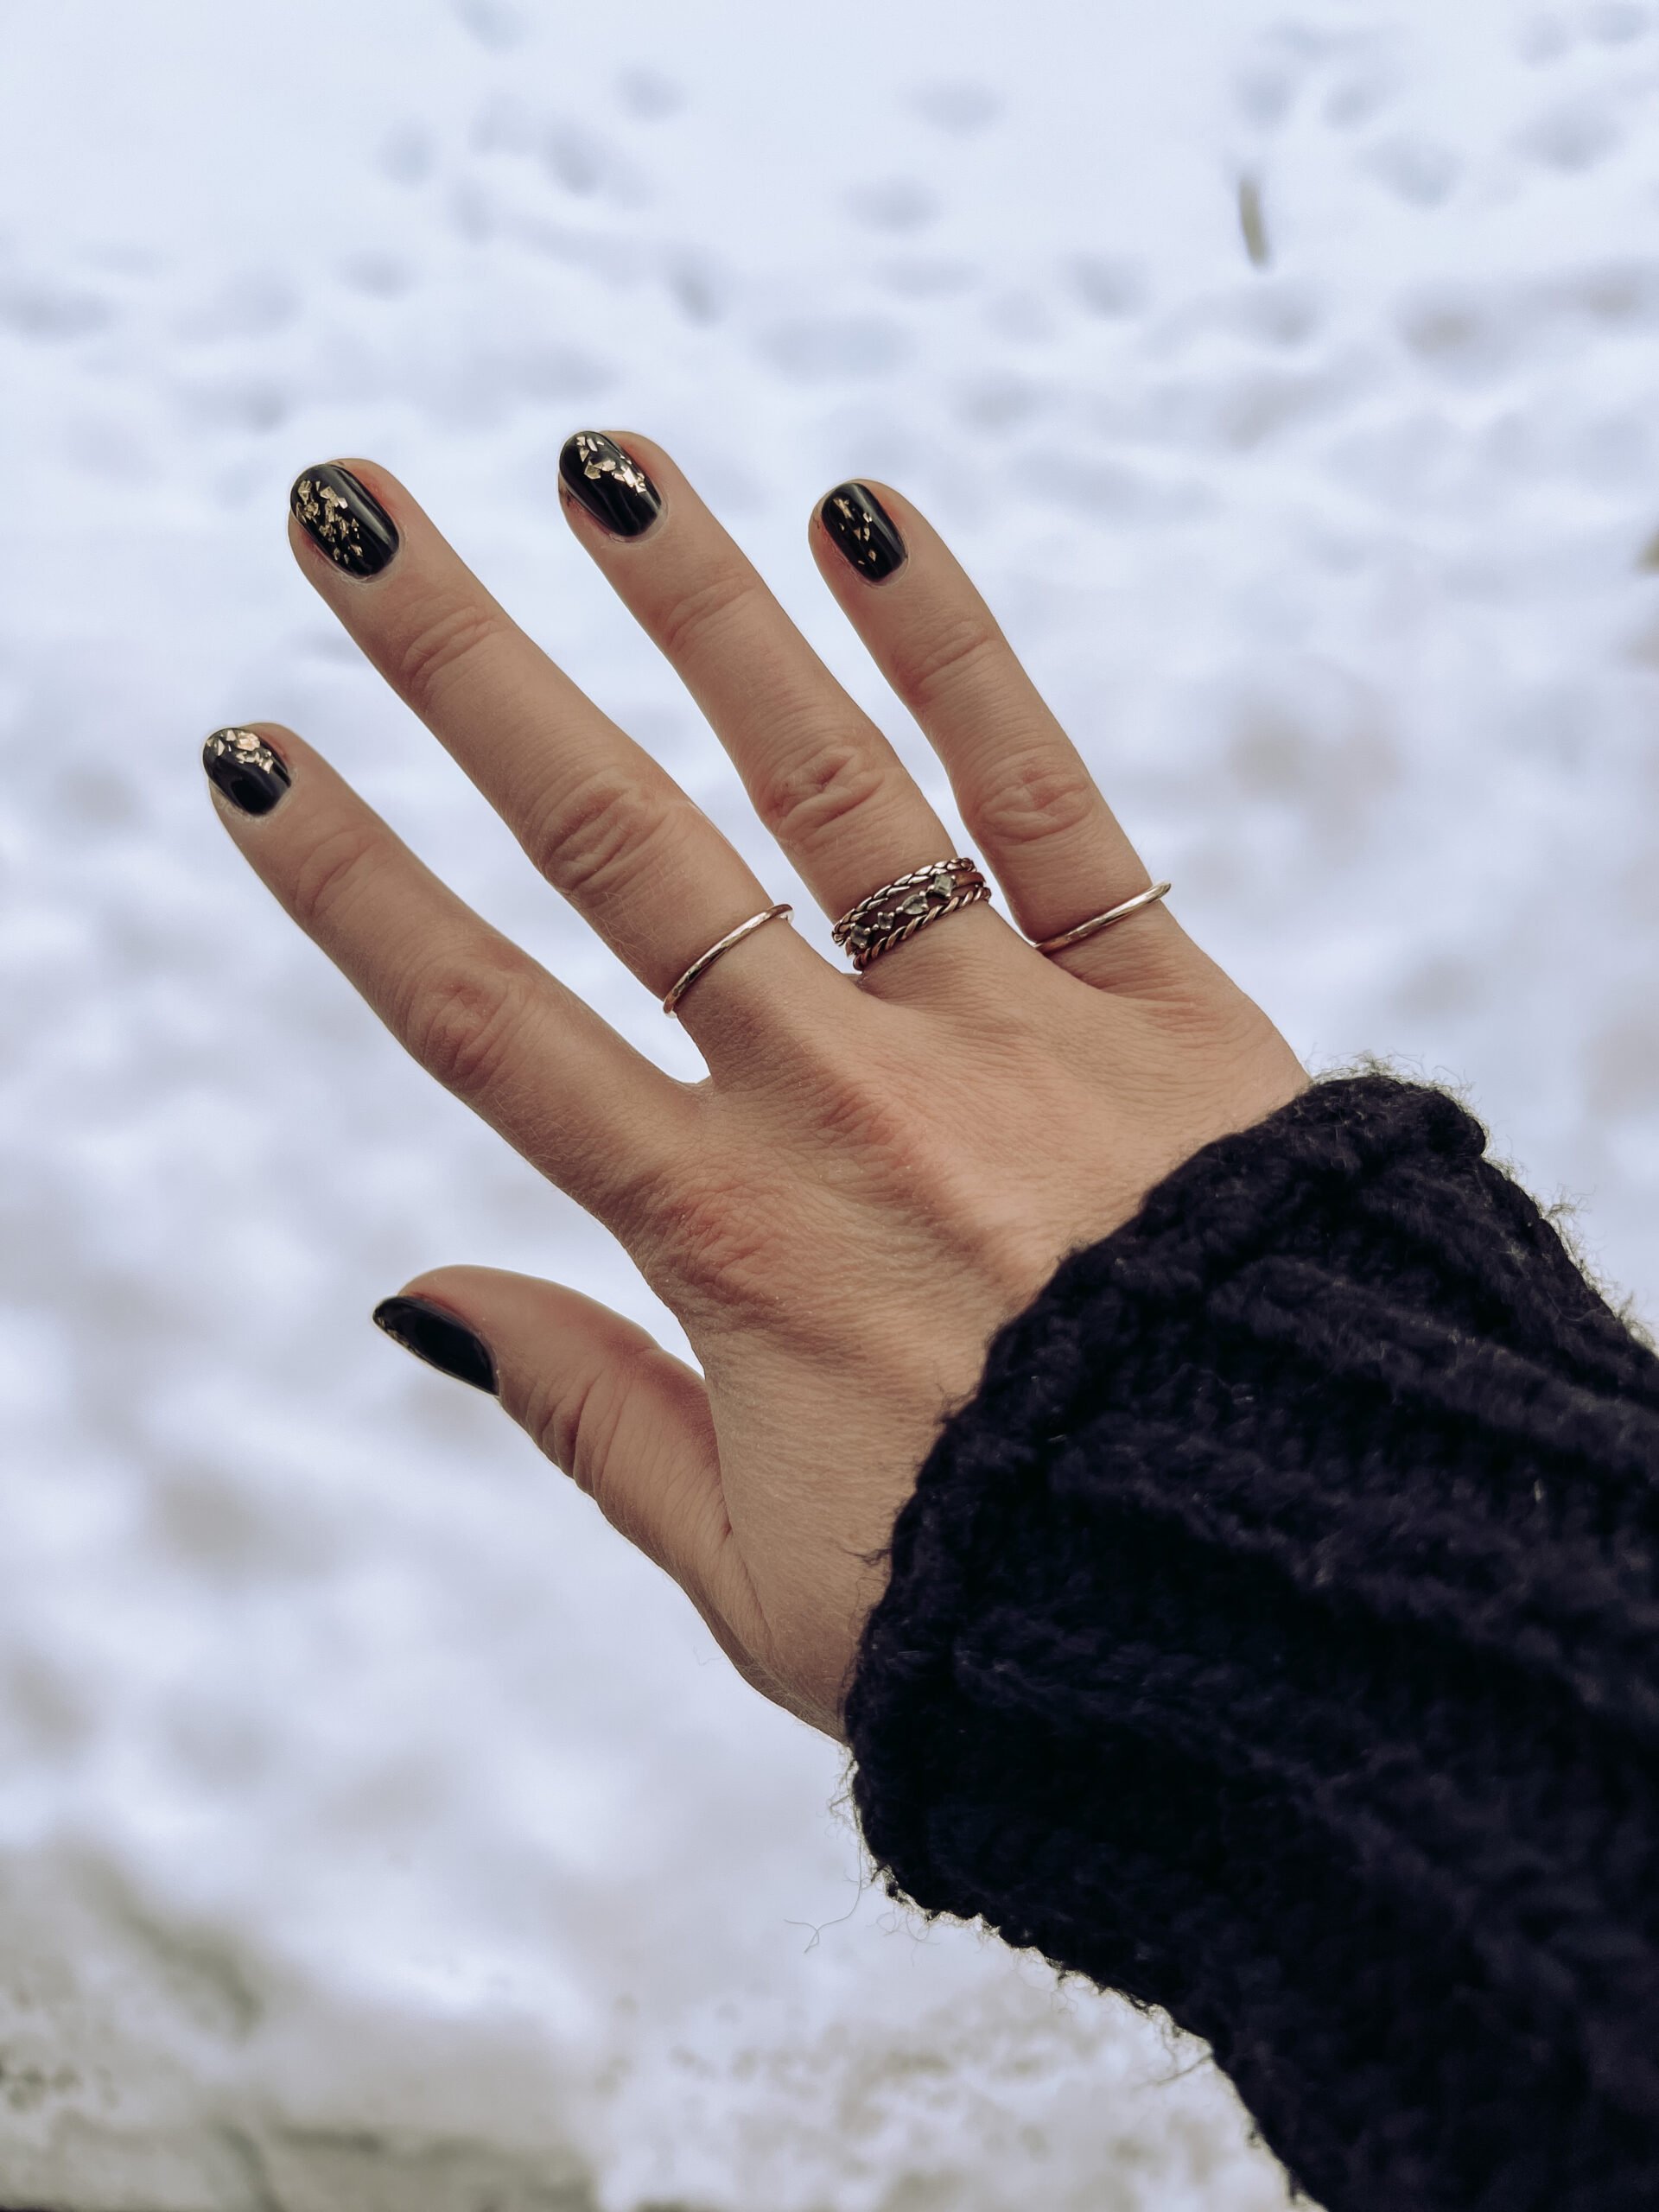 Black painted nails on hand are held in front of a snowy background. 